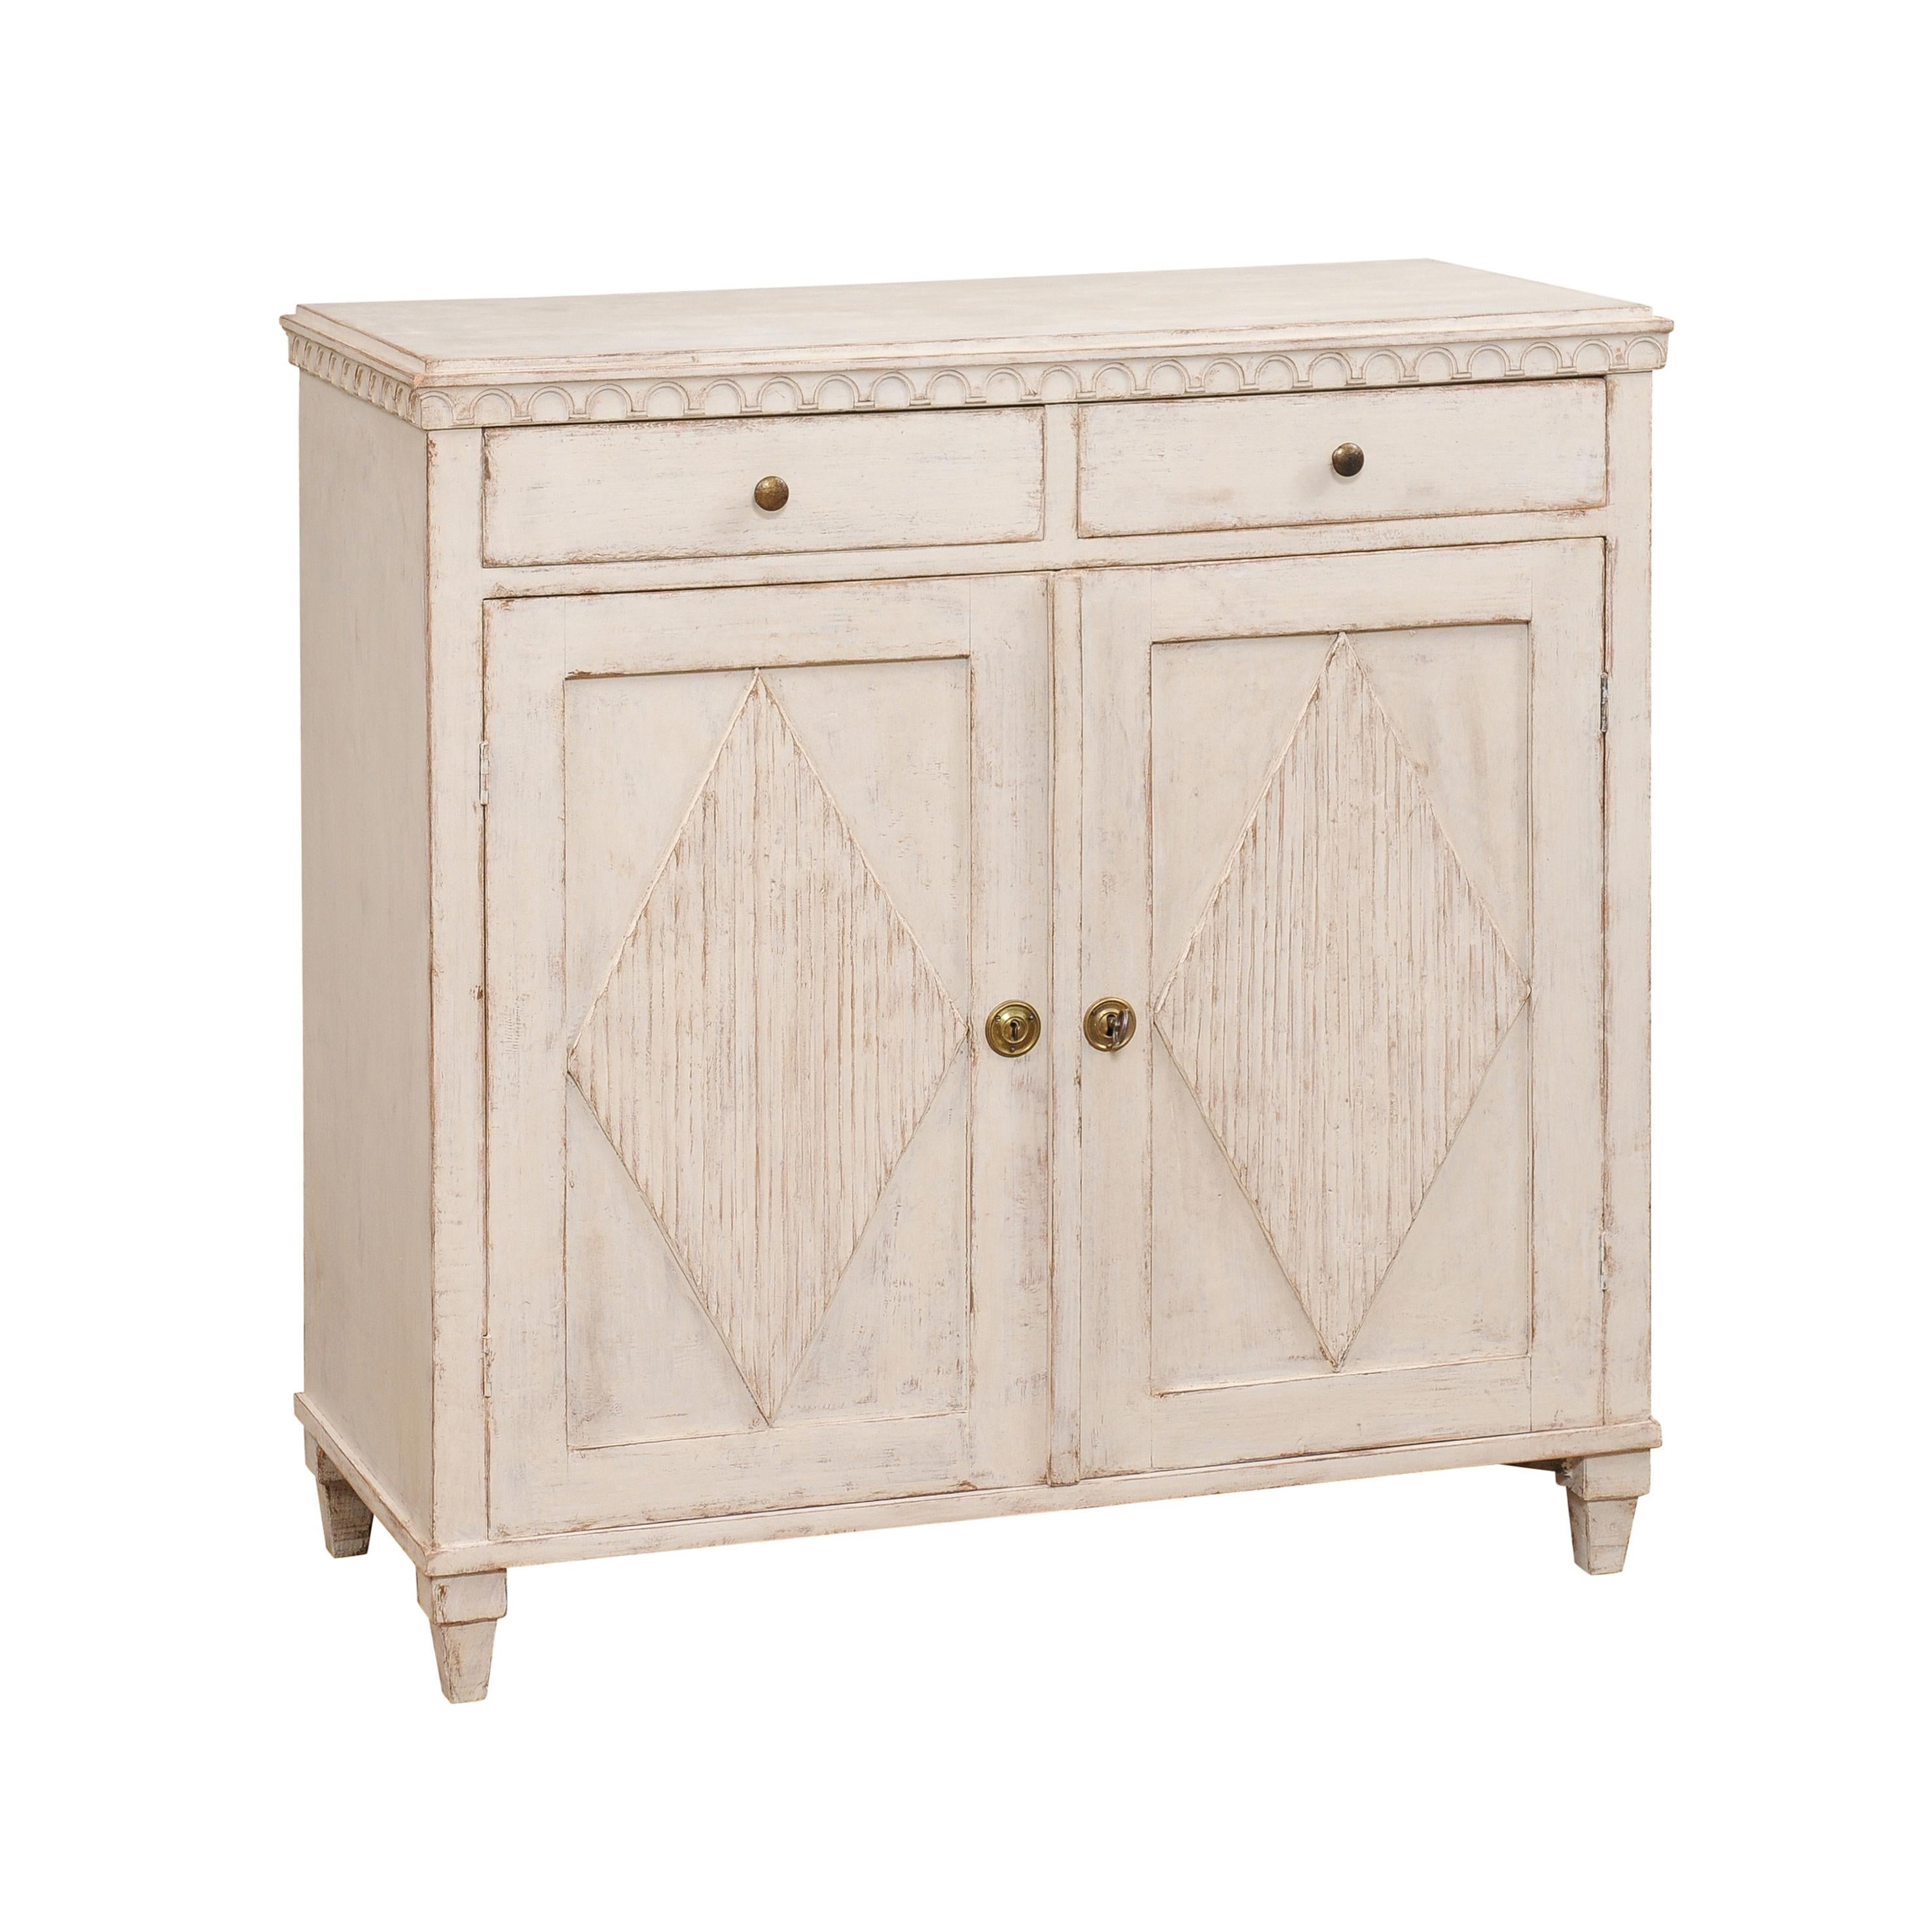 A Swedish Gustavian style painted wood sideboard from circa 1840 with two drawers over two doors and carved diamond motifs. Infuse your space with a touch of Swedish elegance and practicality with this Gustavian-style painted wood sideboard from